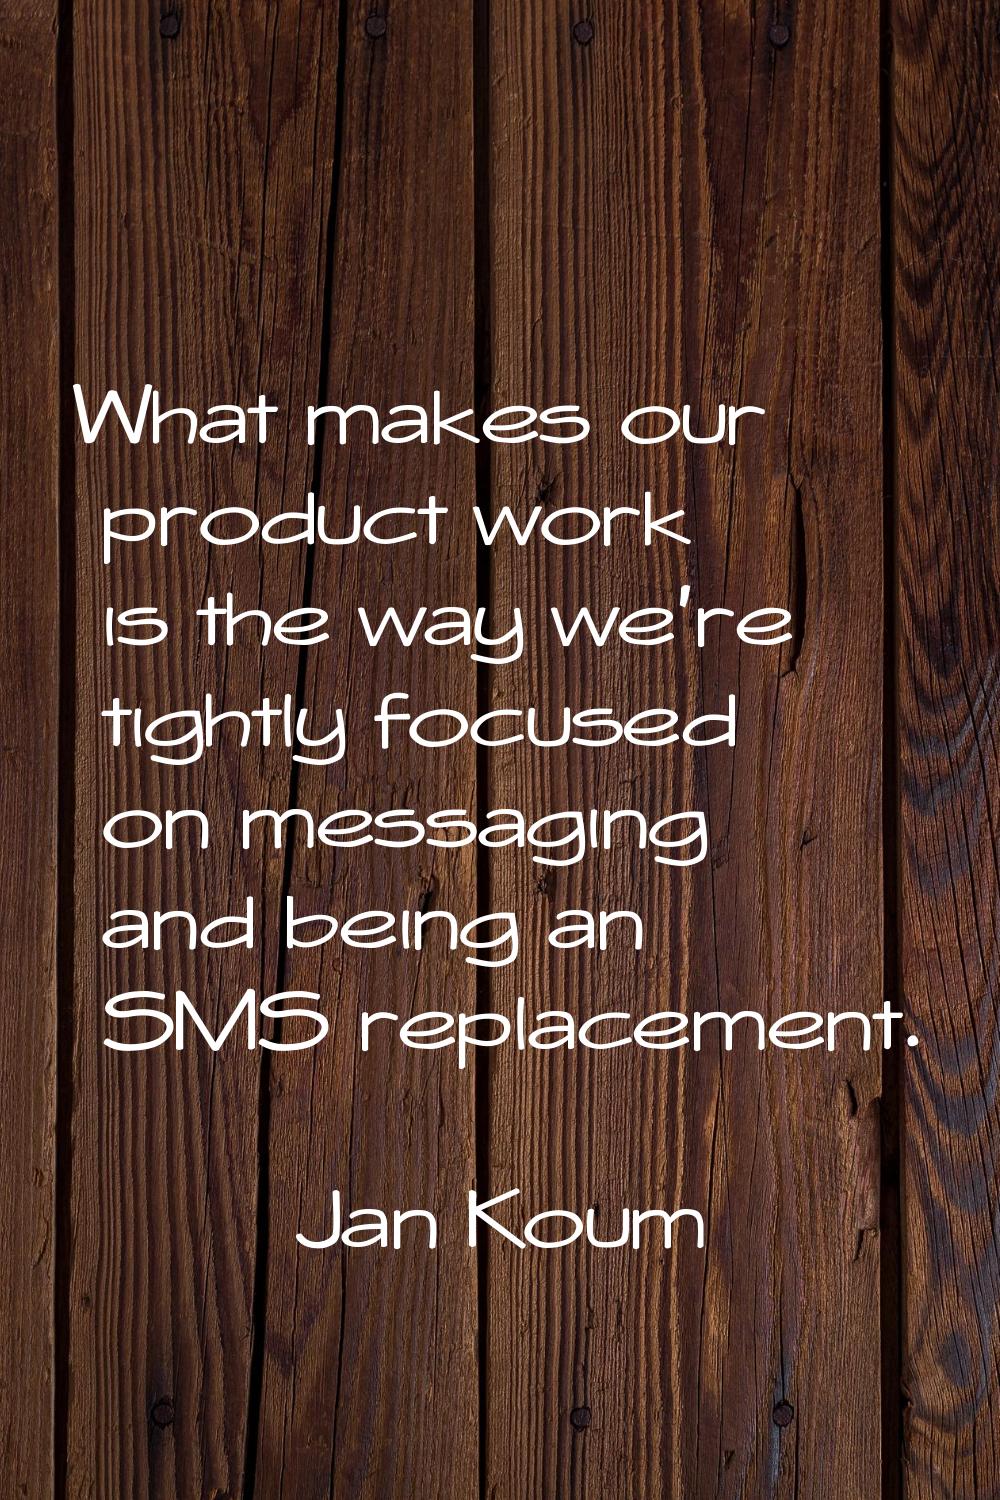 What makes our product work is the way we're tightly focused on messaging and being an SMS replacem